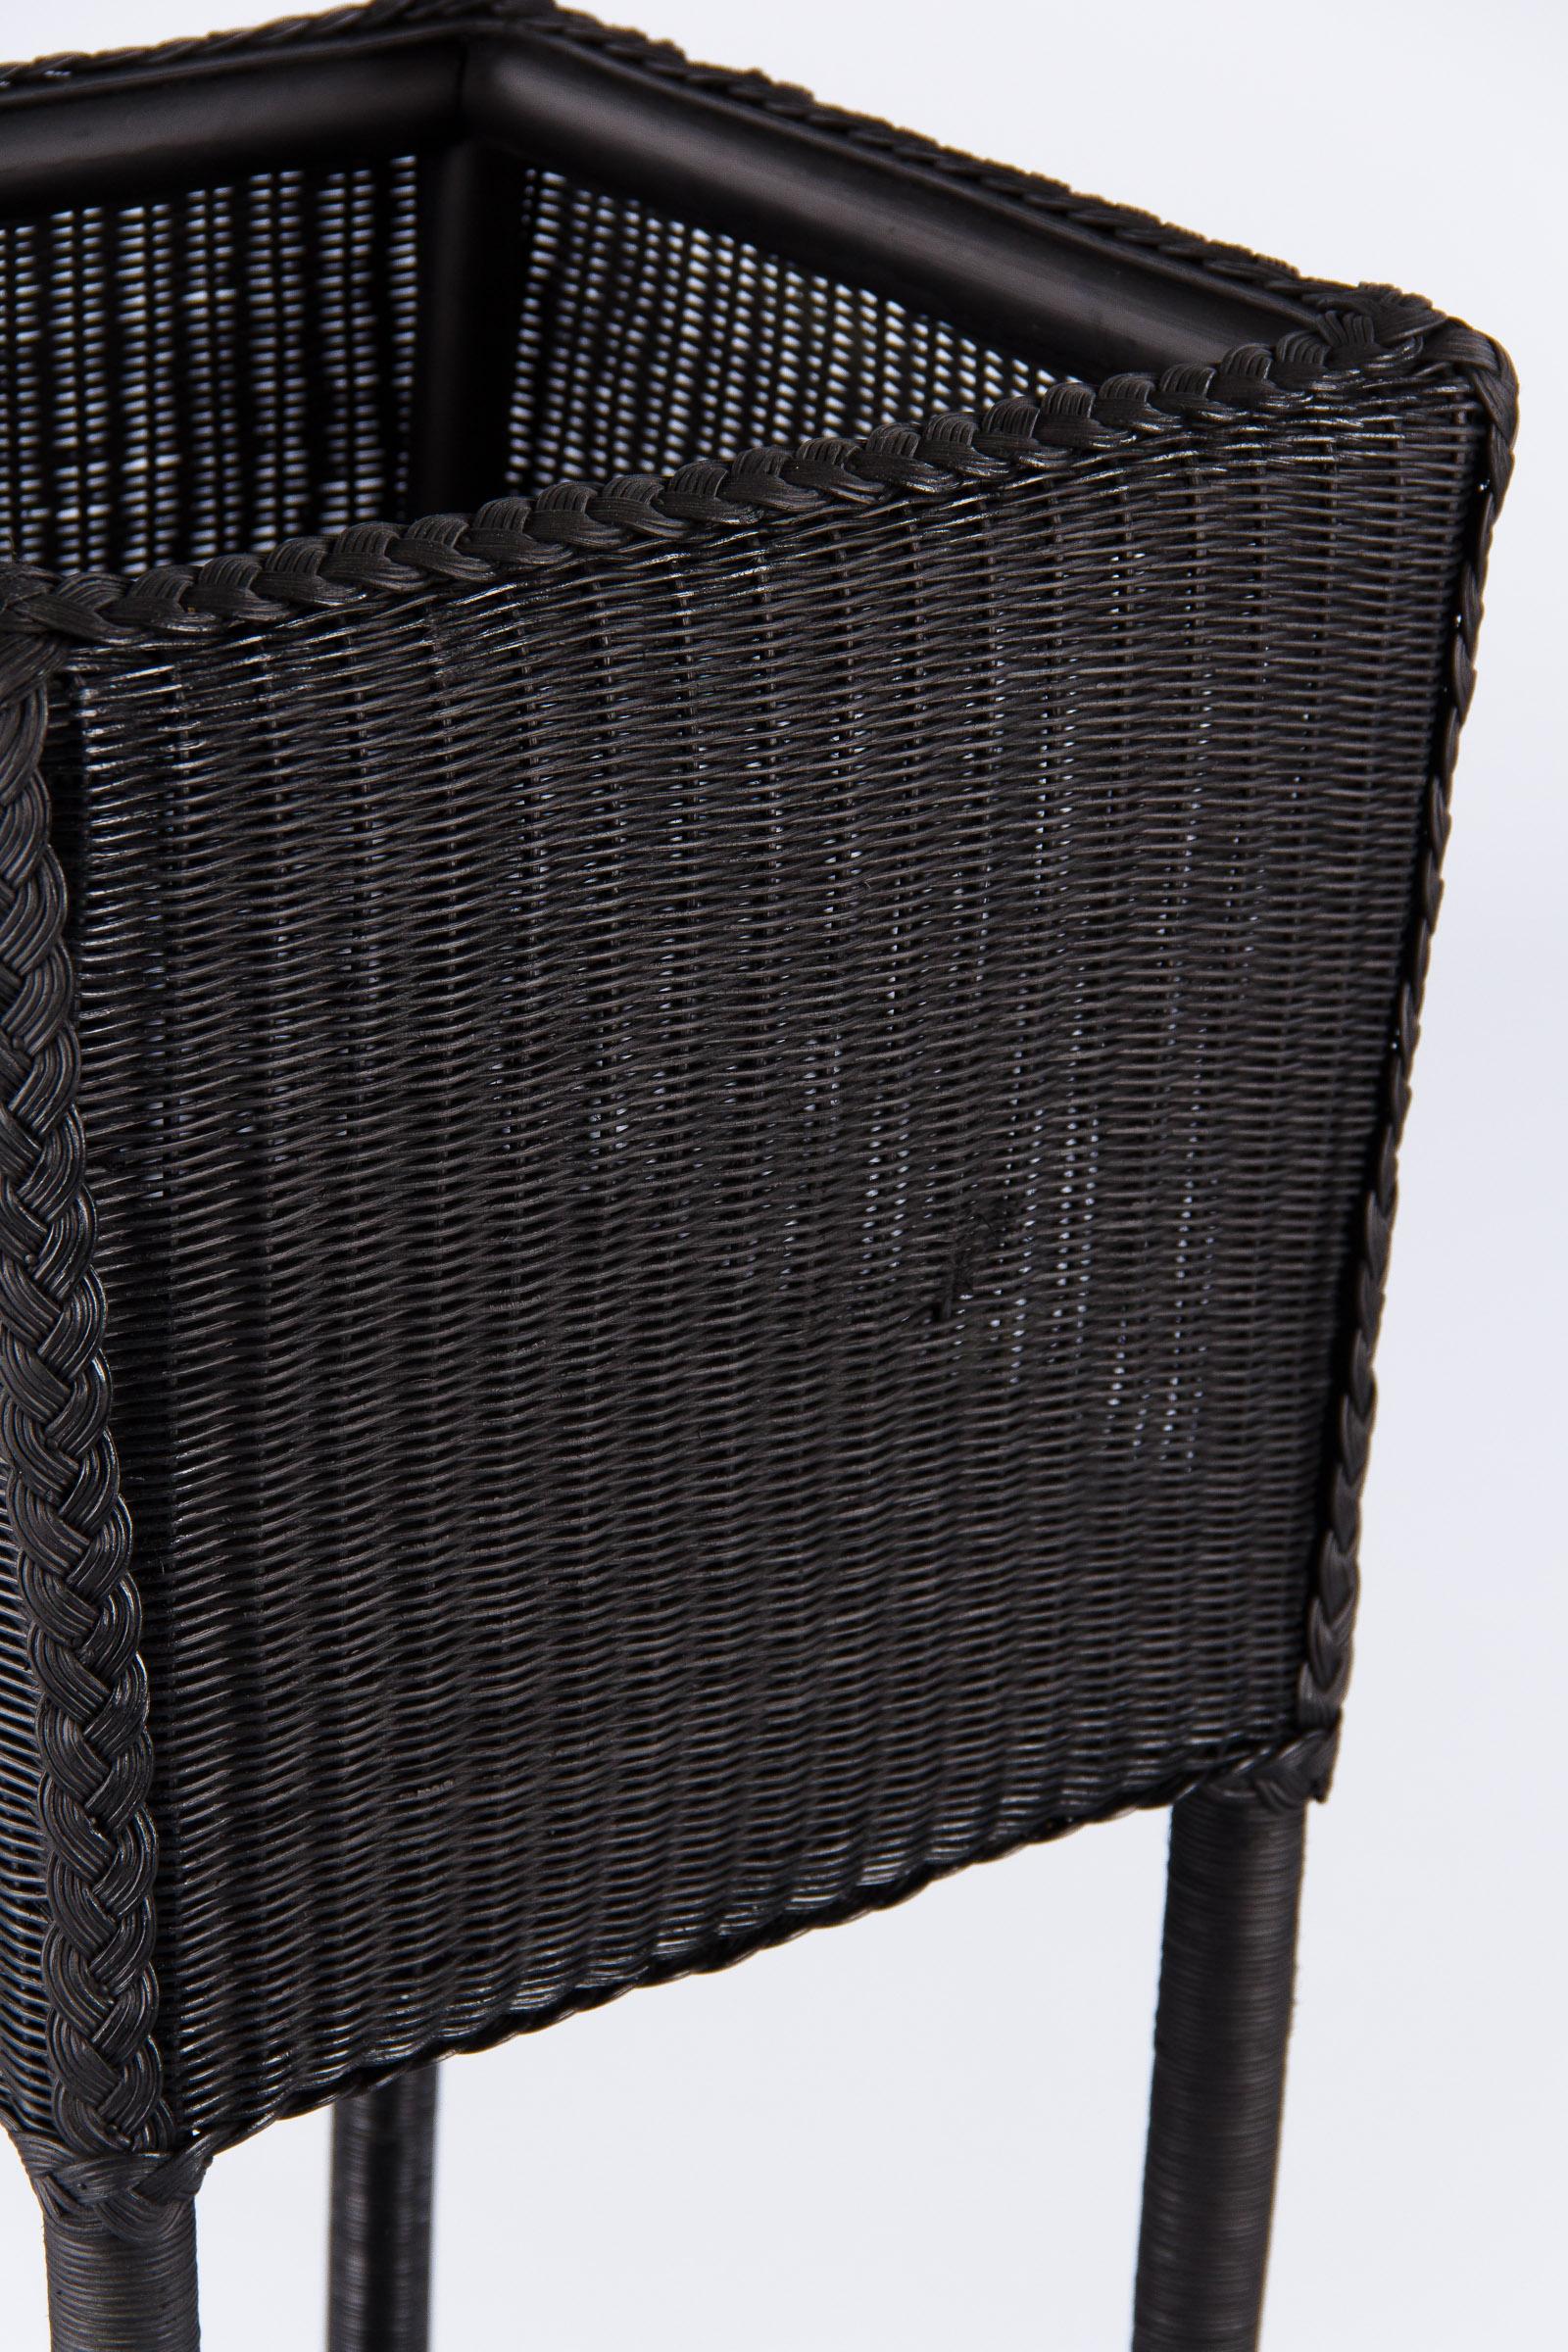 20th Century French Painted Black Wicker Jardinière, 1940s